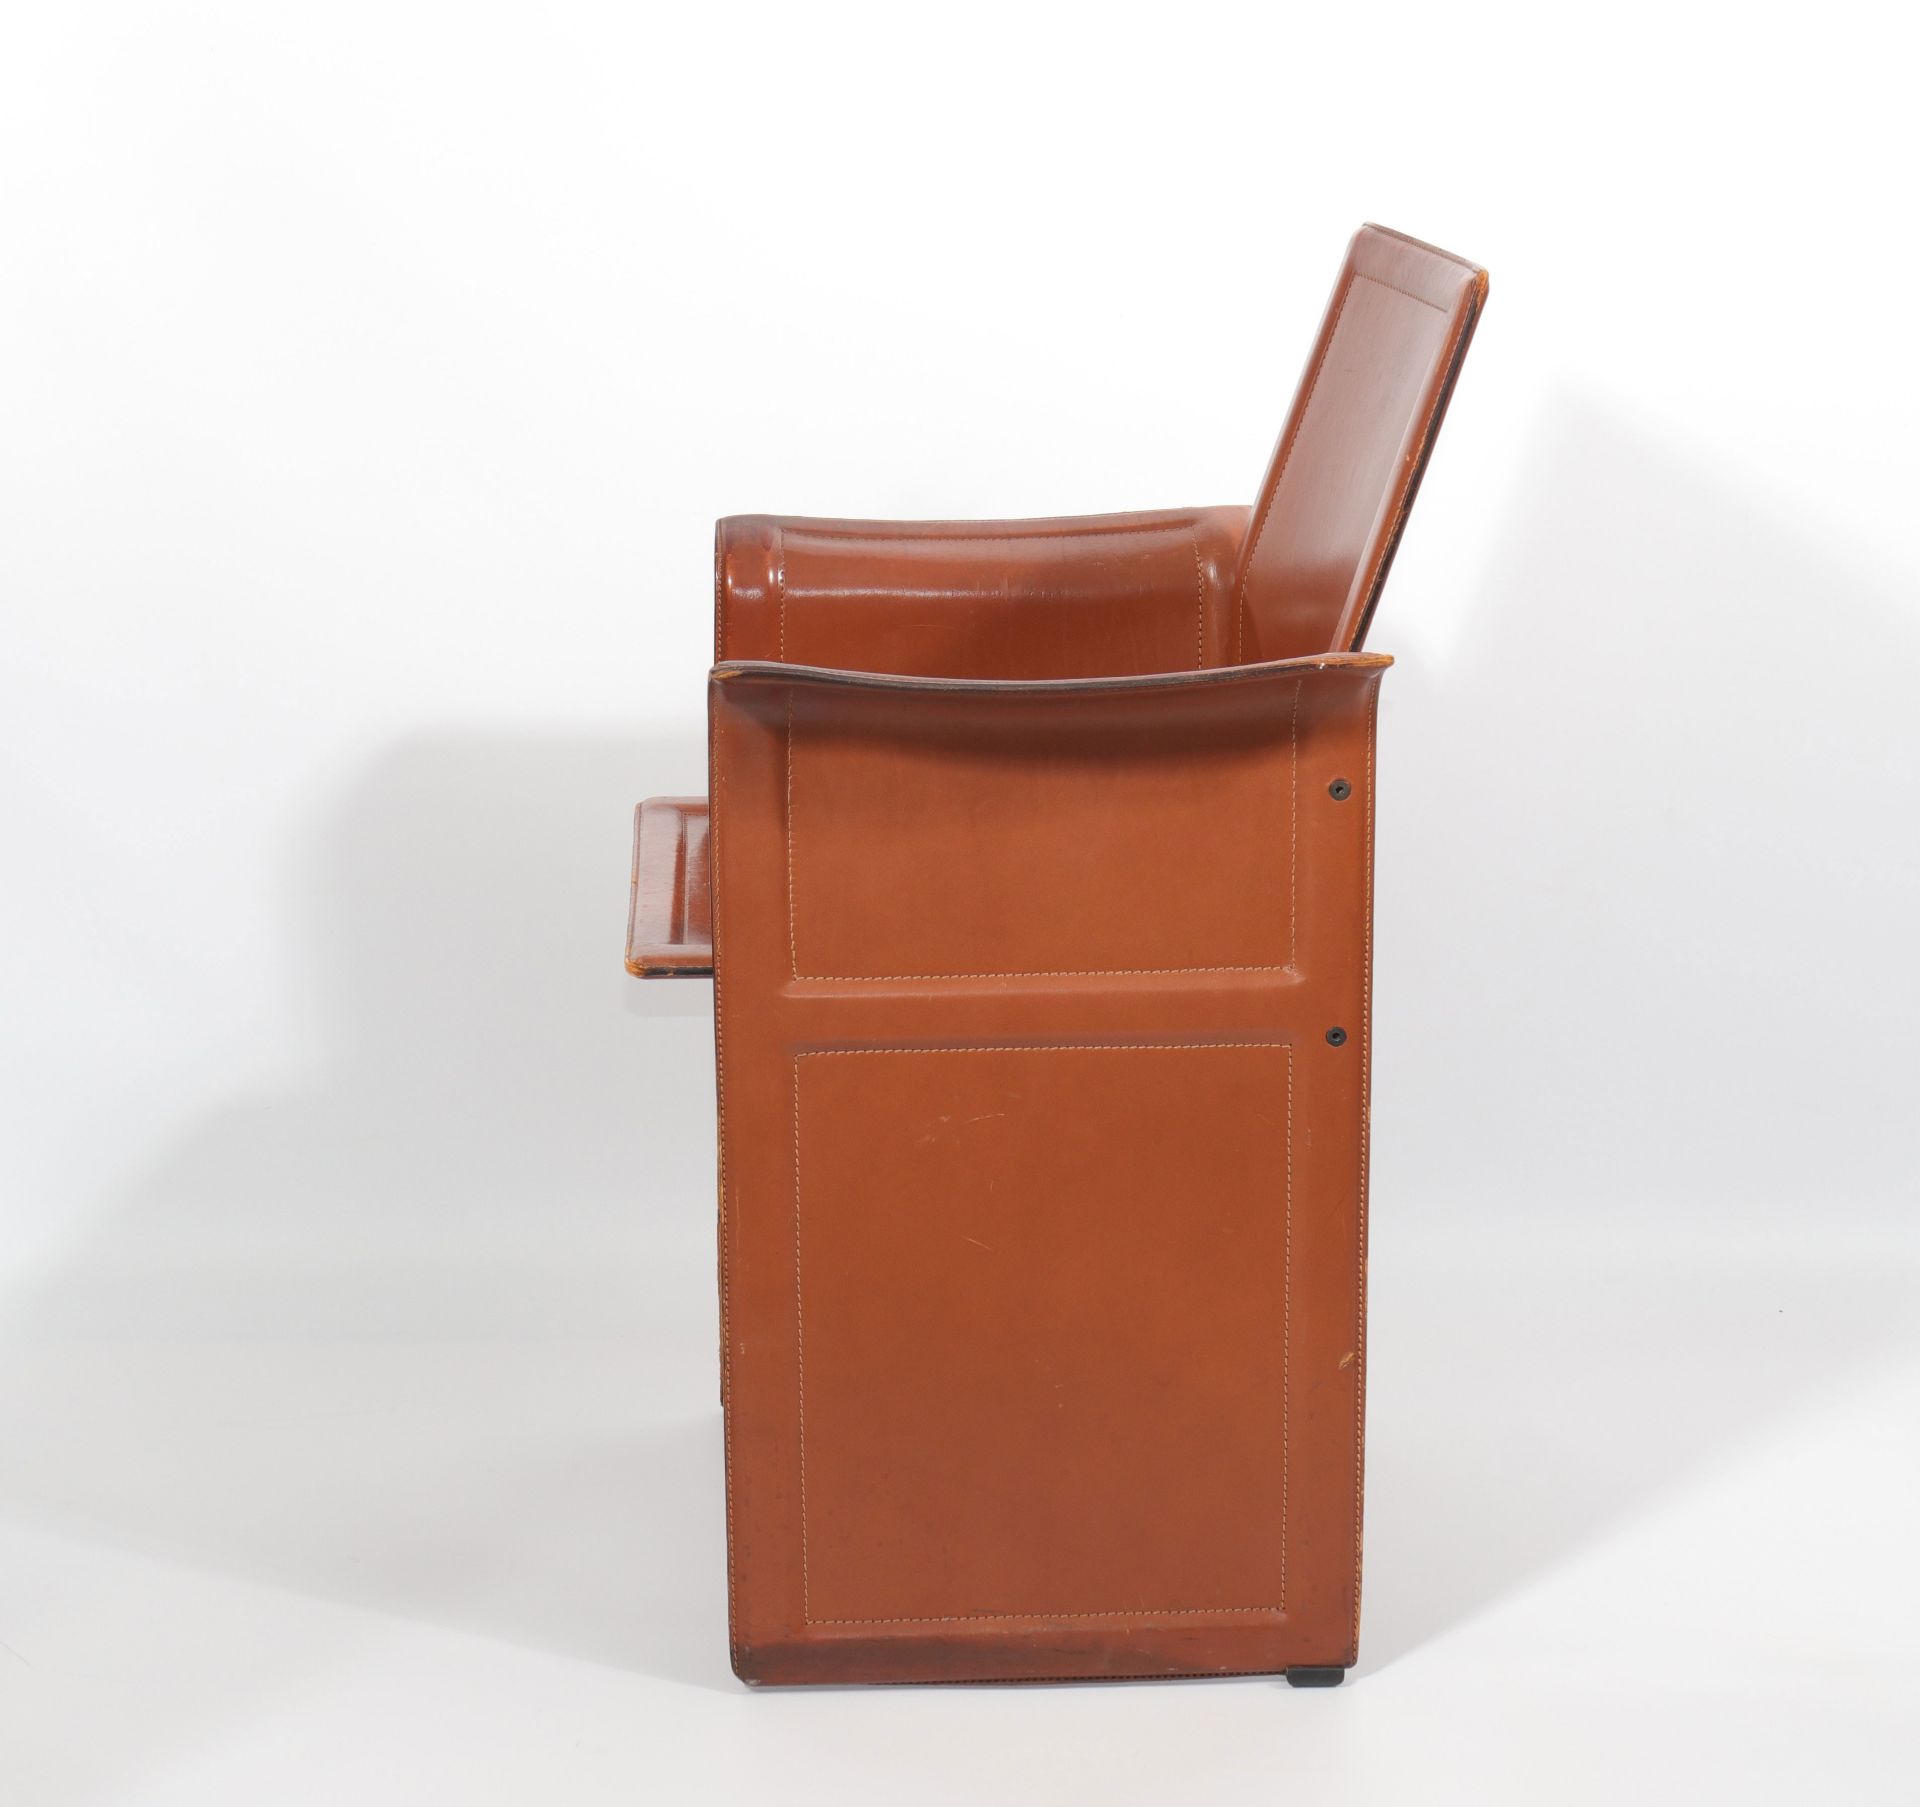 Suite of 12 Matteo Grassi chairs in brown patina leather - Image 3 of 4